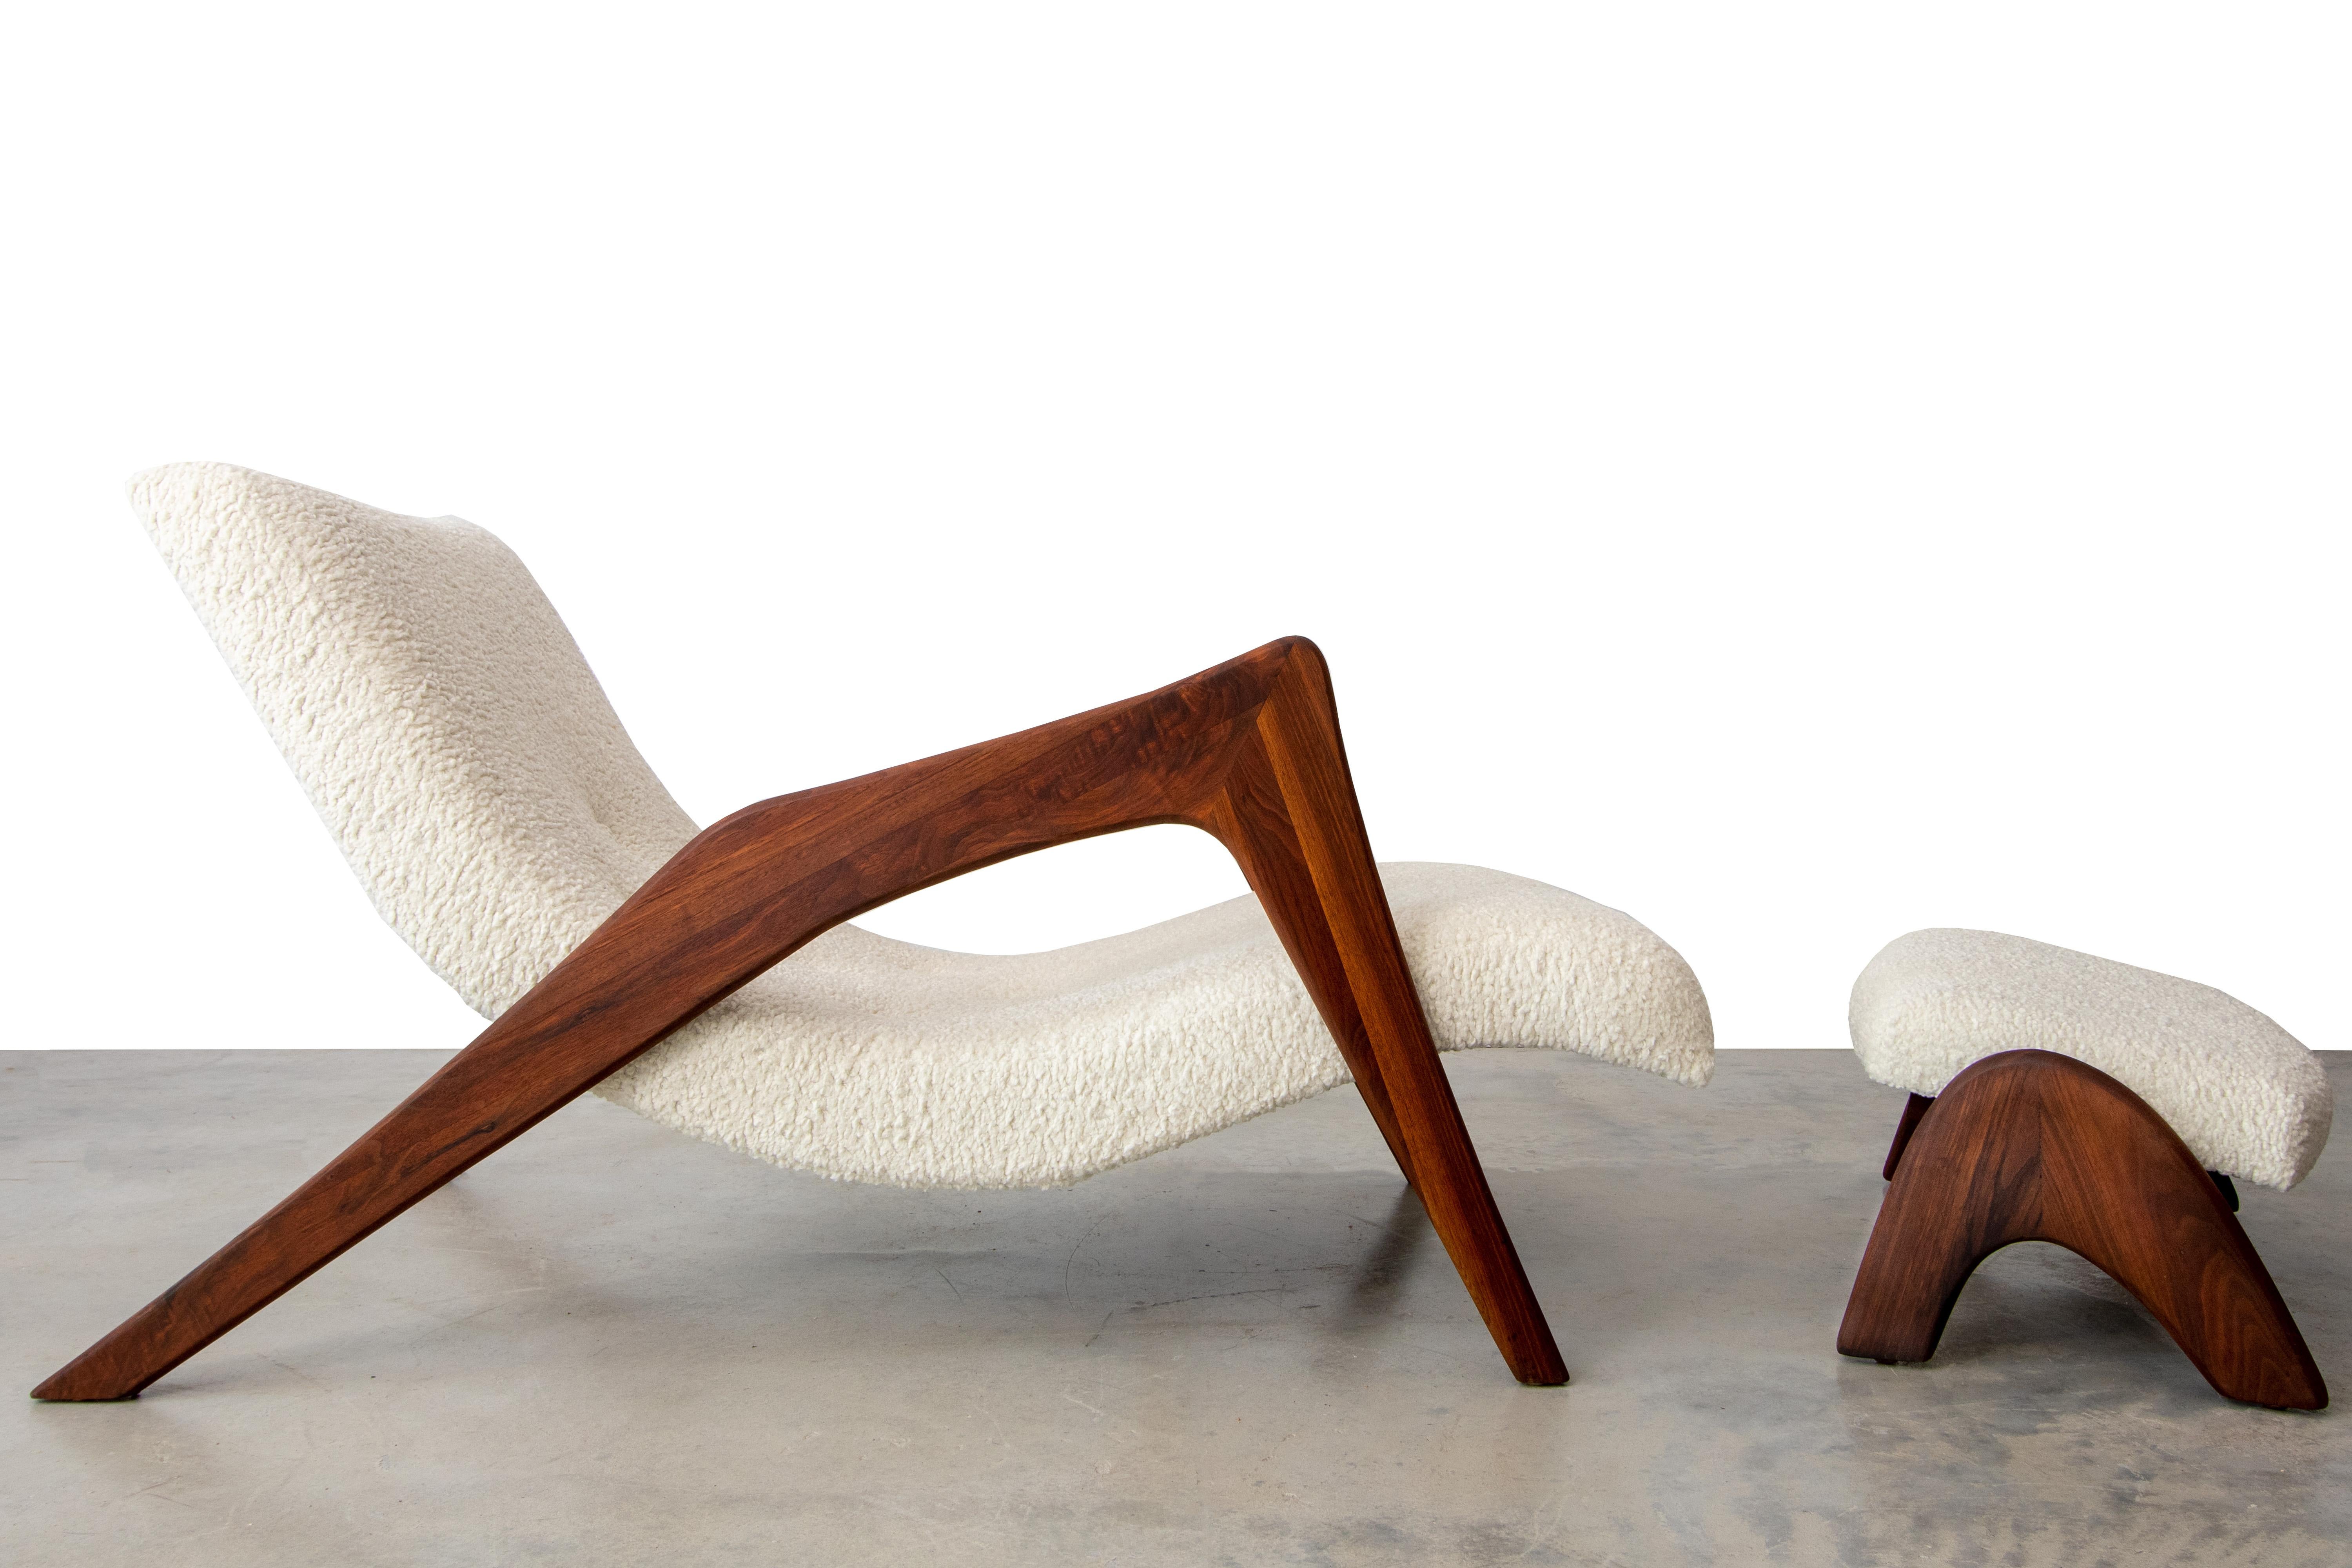 Crescent lounge chair and ottoman by Adrian Pearsall for Craft Associates Model 745-LB aka the “Grasshopper chair”. The chaise lounge consists of solid walnut legs and new boucle covered curved seats. The chair and ottoman have been completely